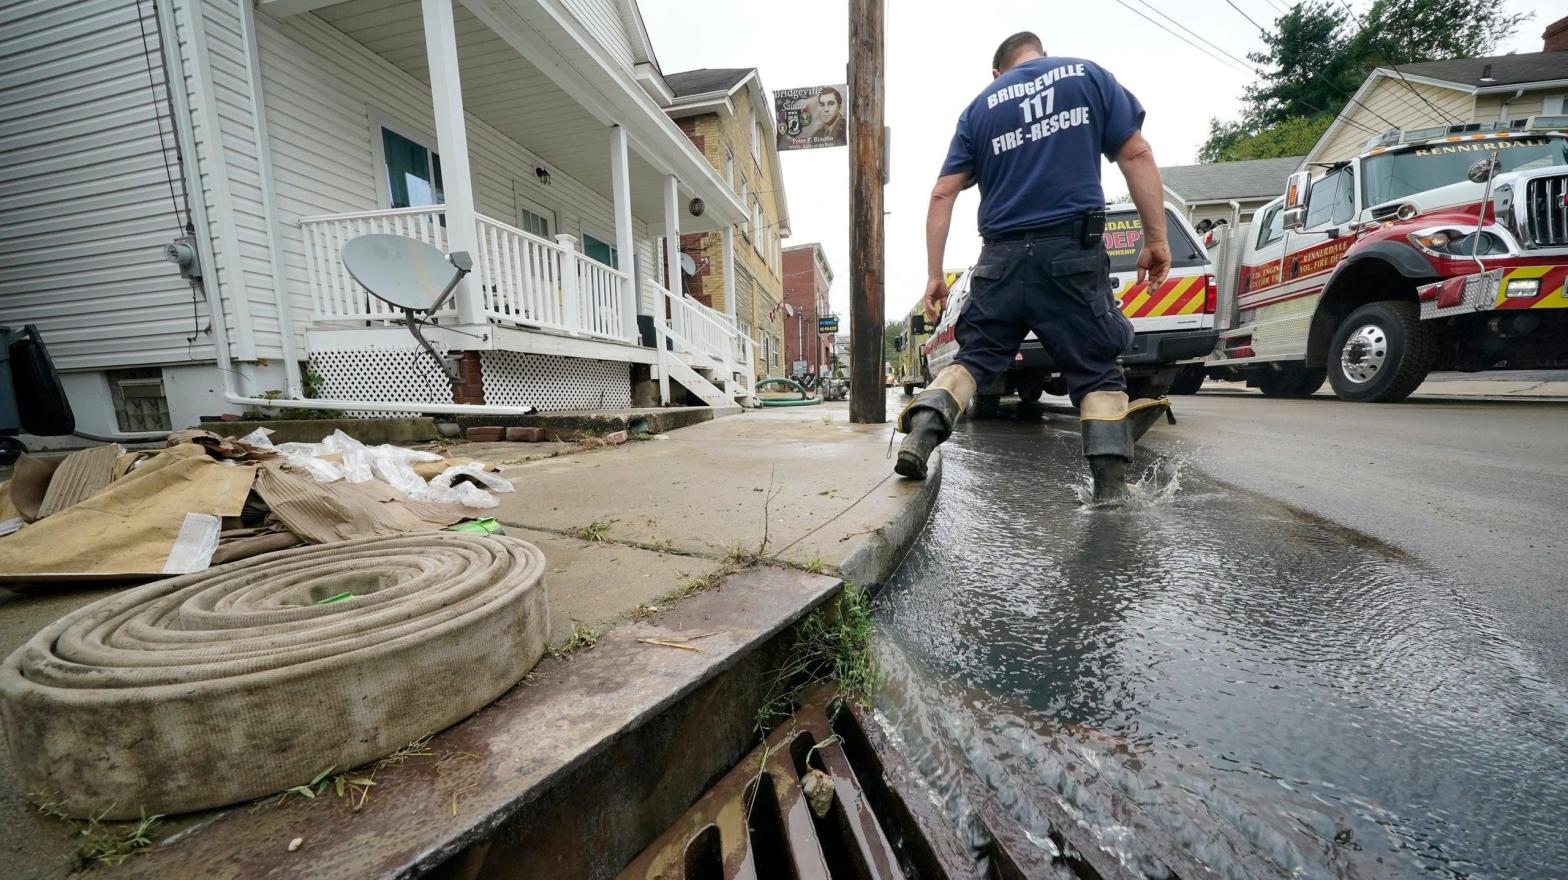 Clean up from flooding on Baldwin street in Bridgeville, Pa. continues after downpours and high winds from the remnants of Hurricane Ida, hit the area Wednesday, Sept. 1, 2021. (Photo: Gene J. Puskar, AP)